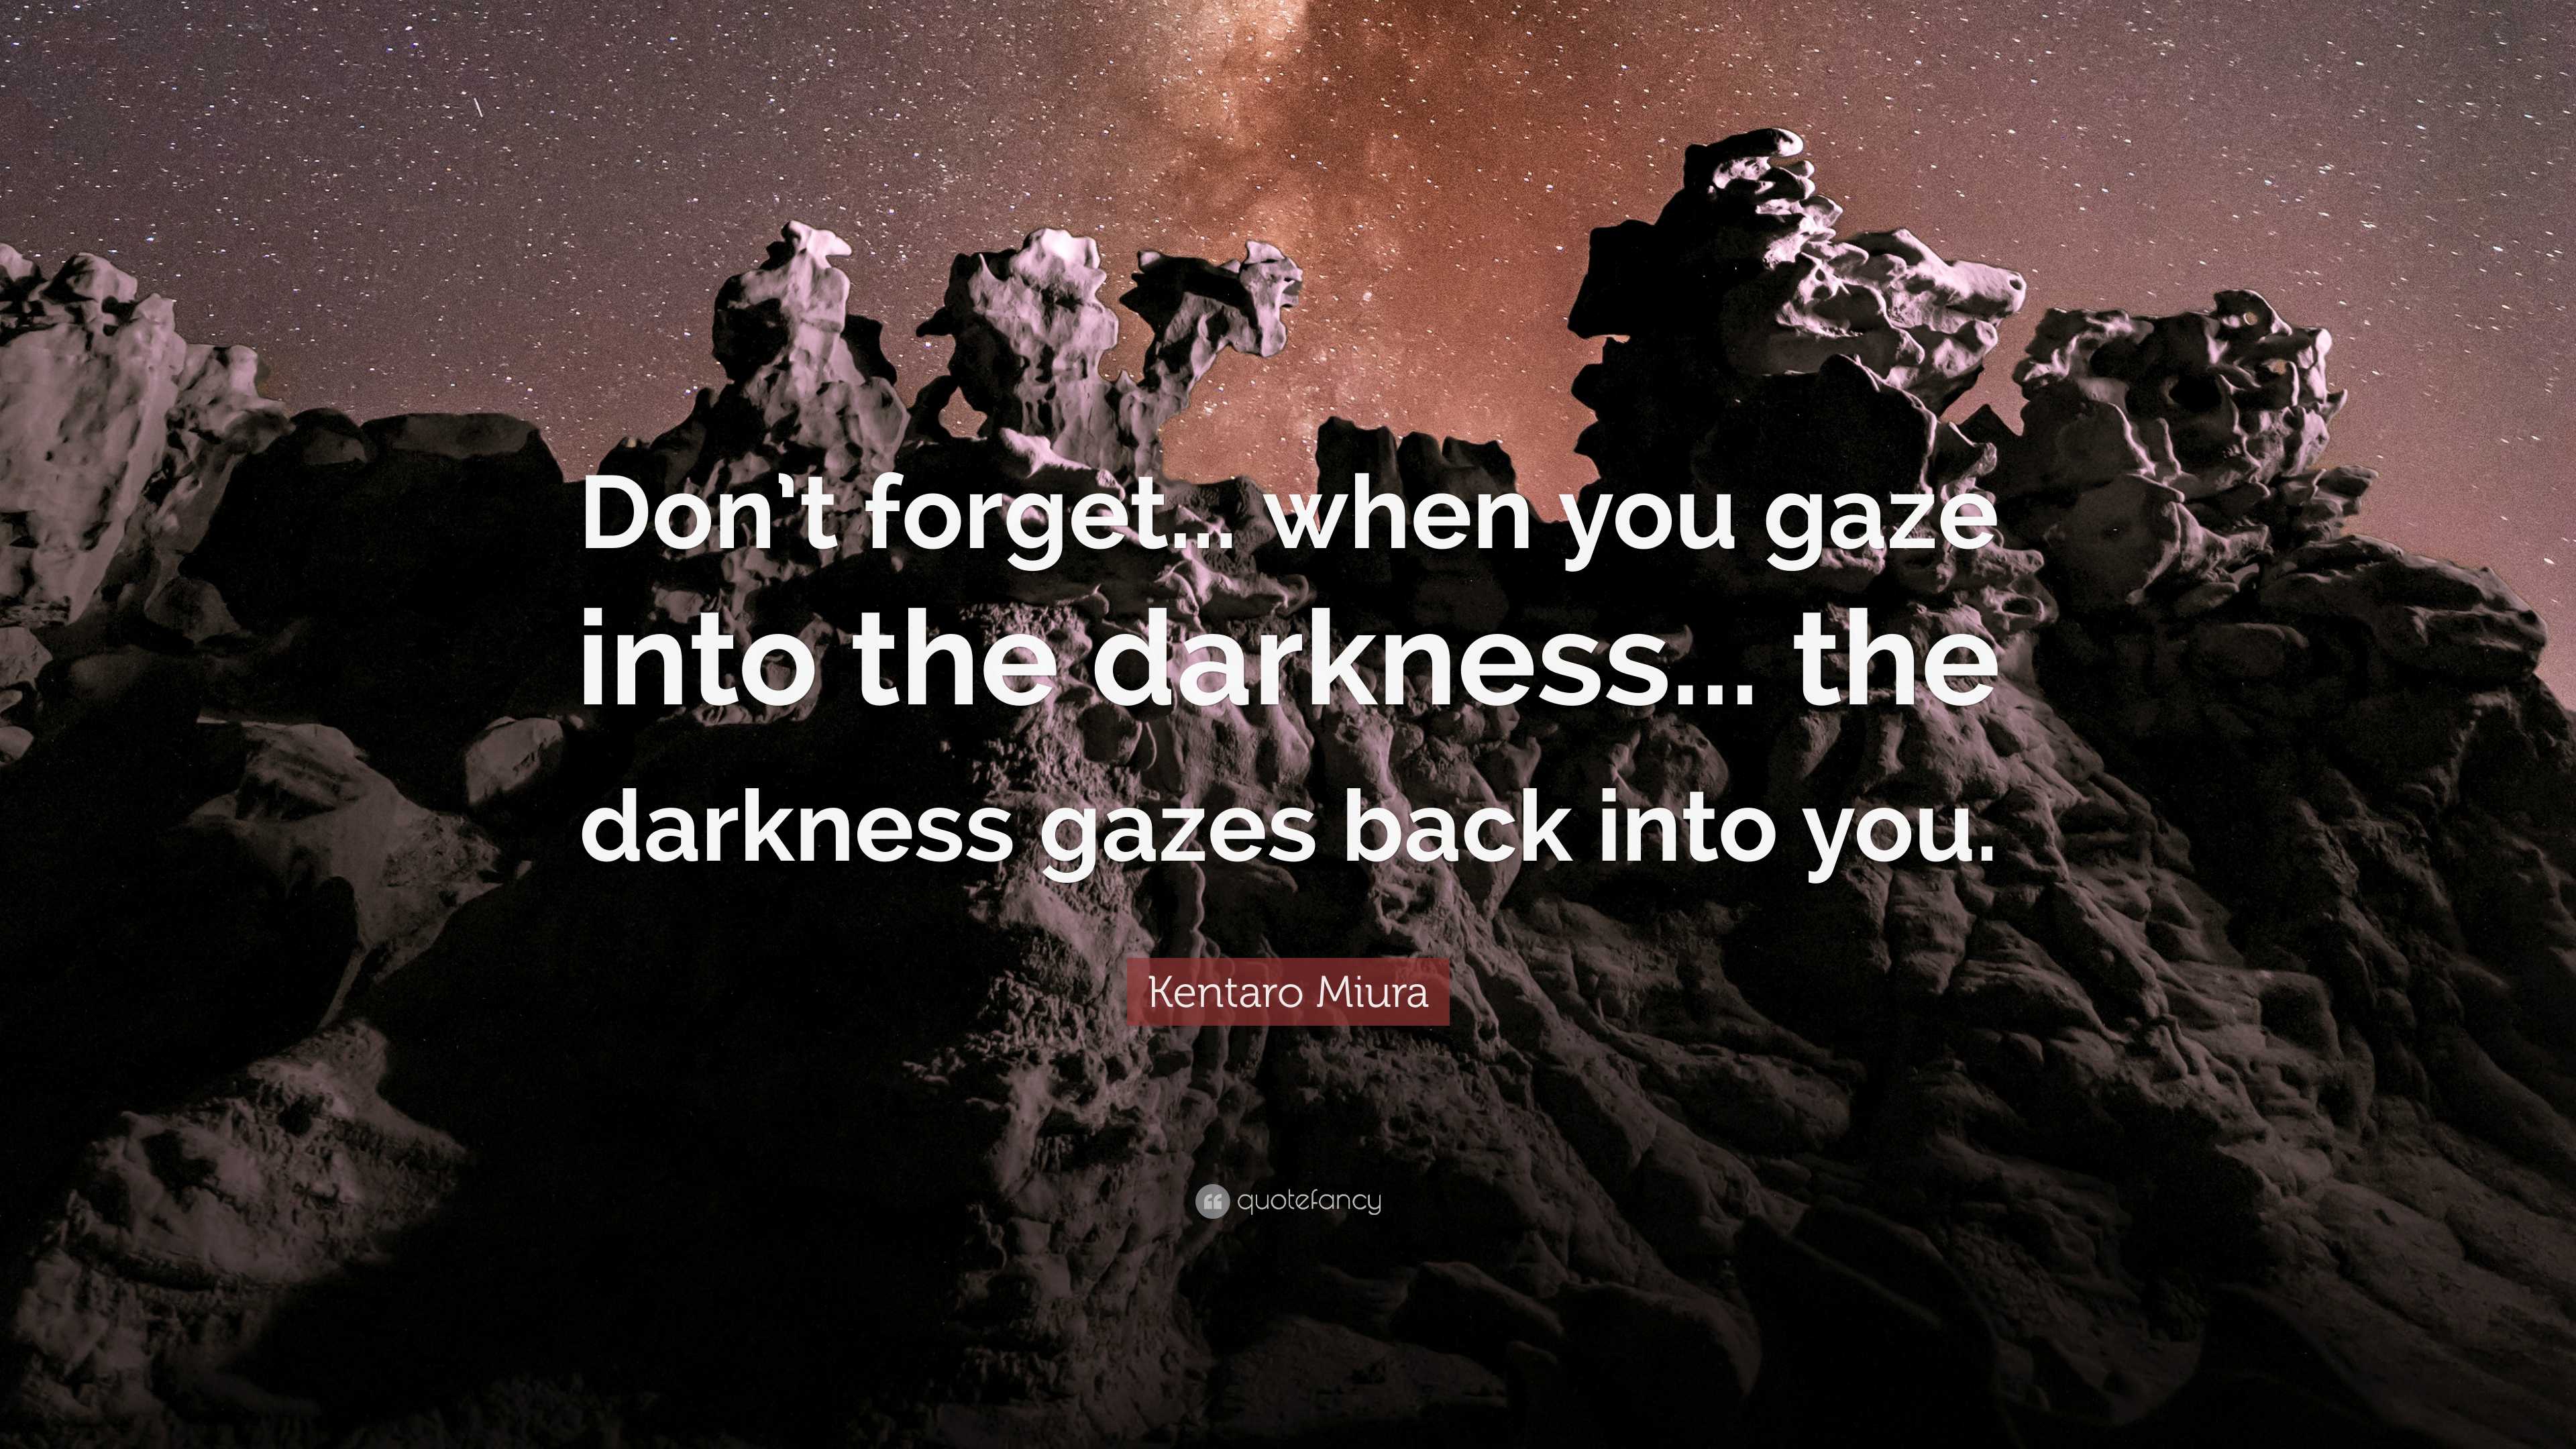 A Shot. - “Don't forget, when you gaze into the darkness 